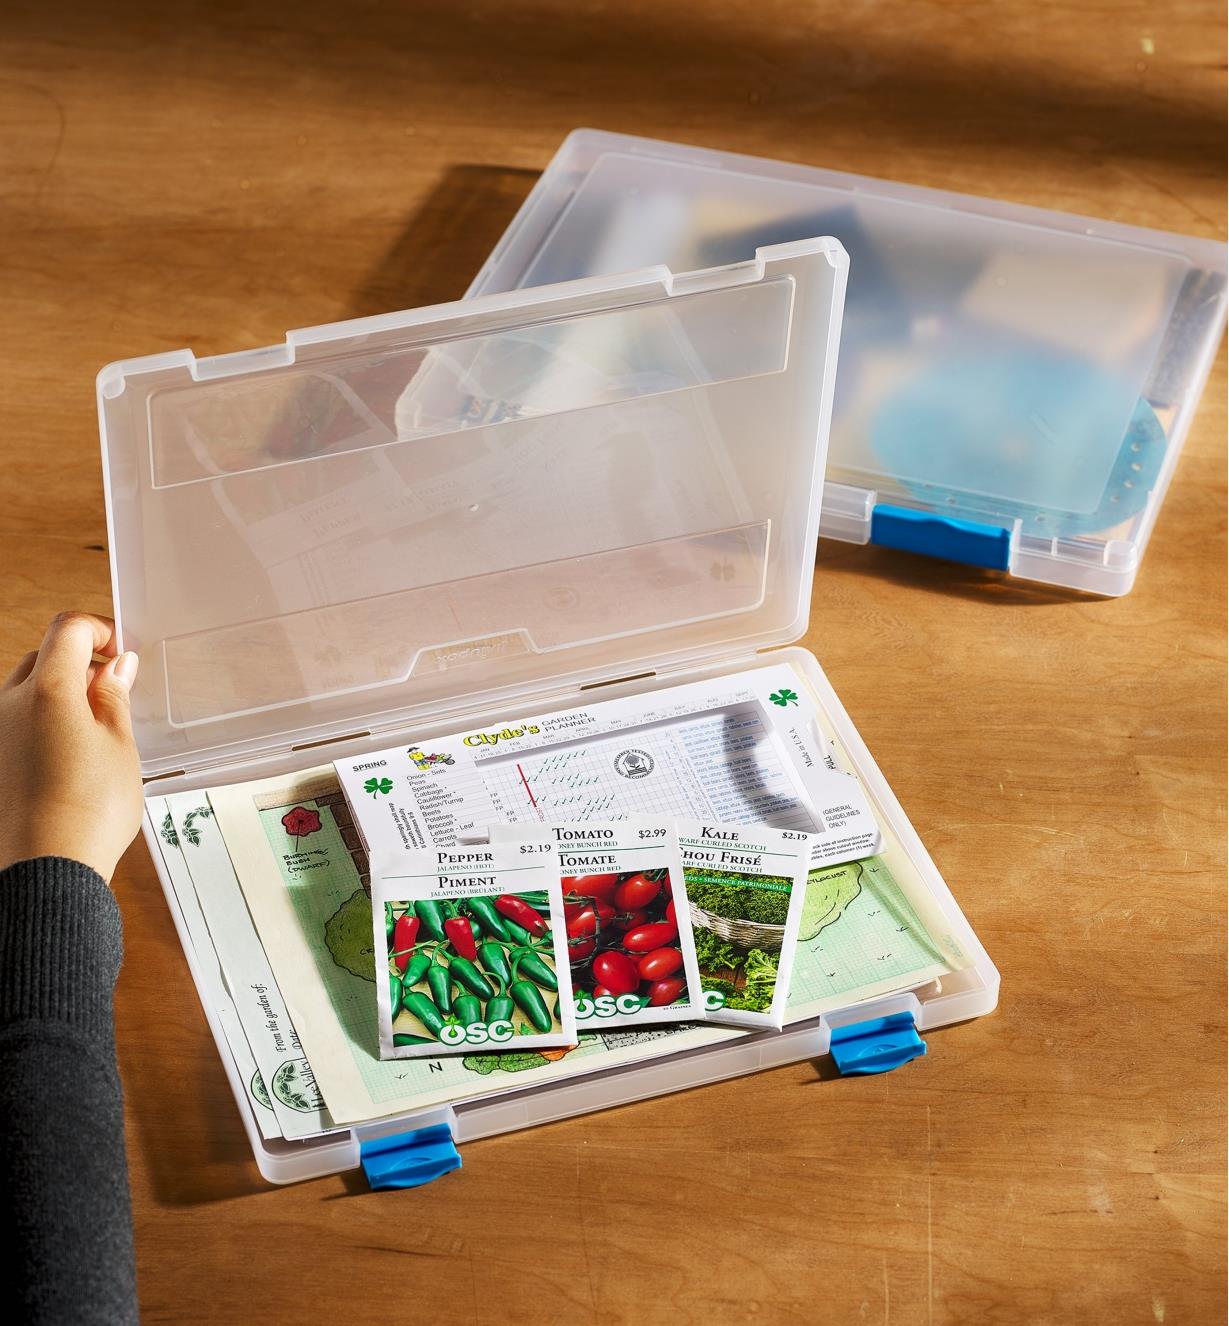 Storage/file case filled with seed packets